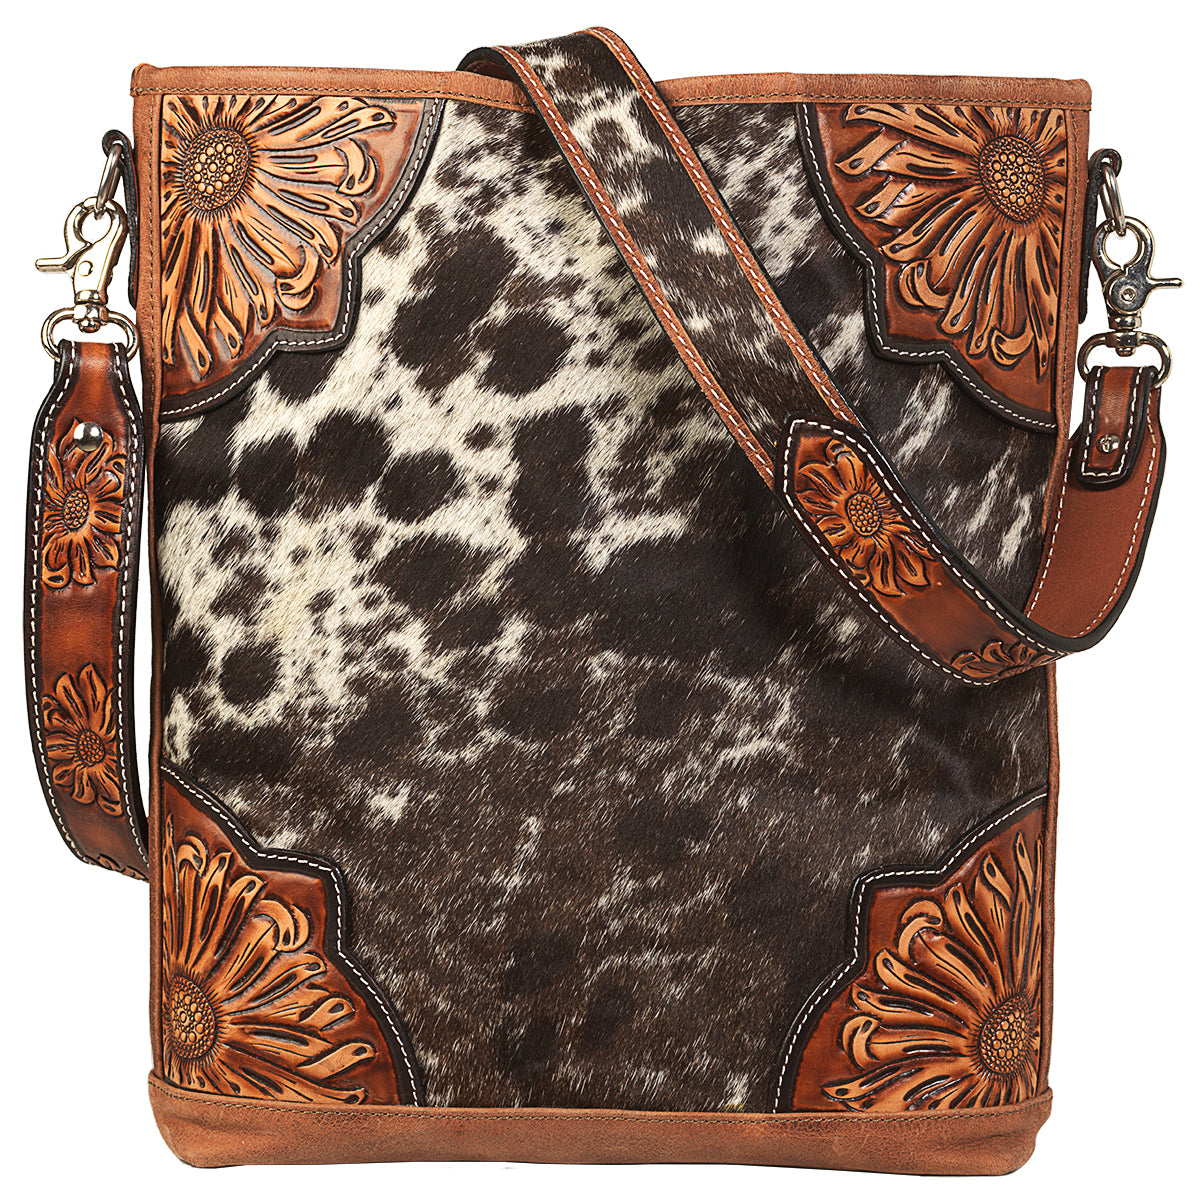 Angel Ranch Spotted Calf Hair Conceal Carry Crossbody - Brown